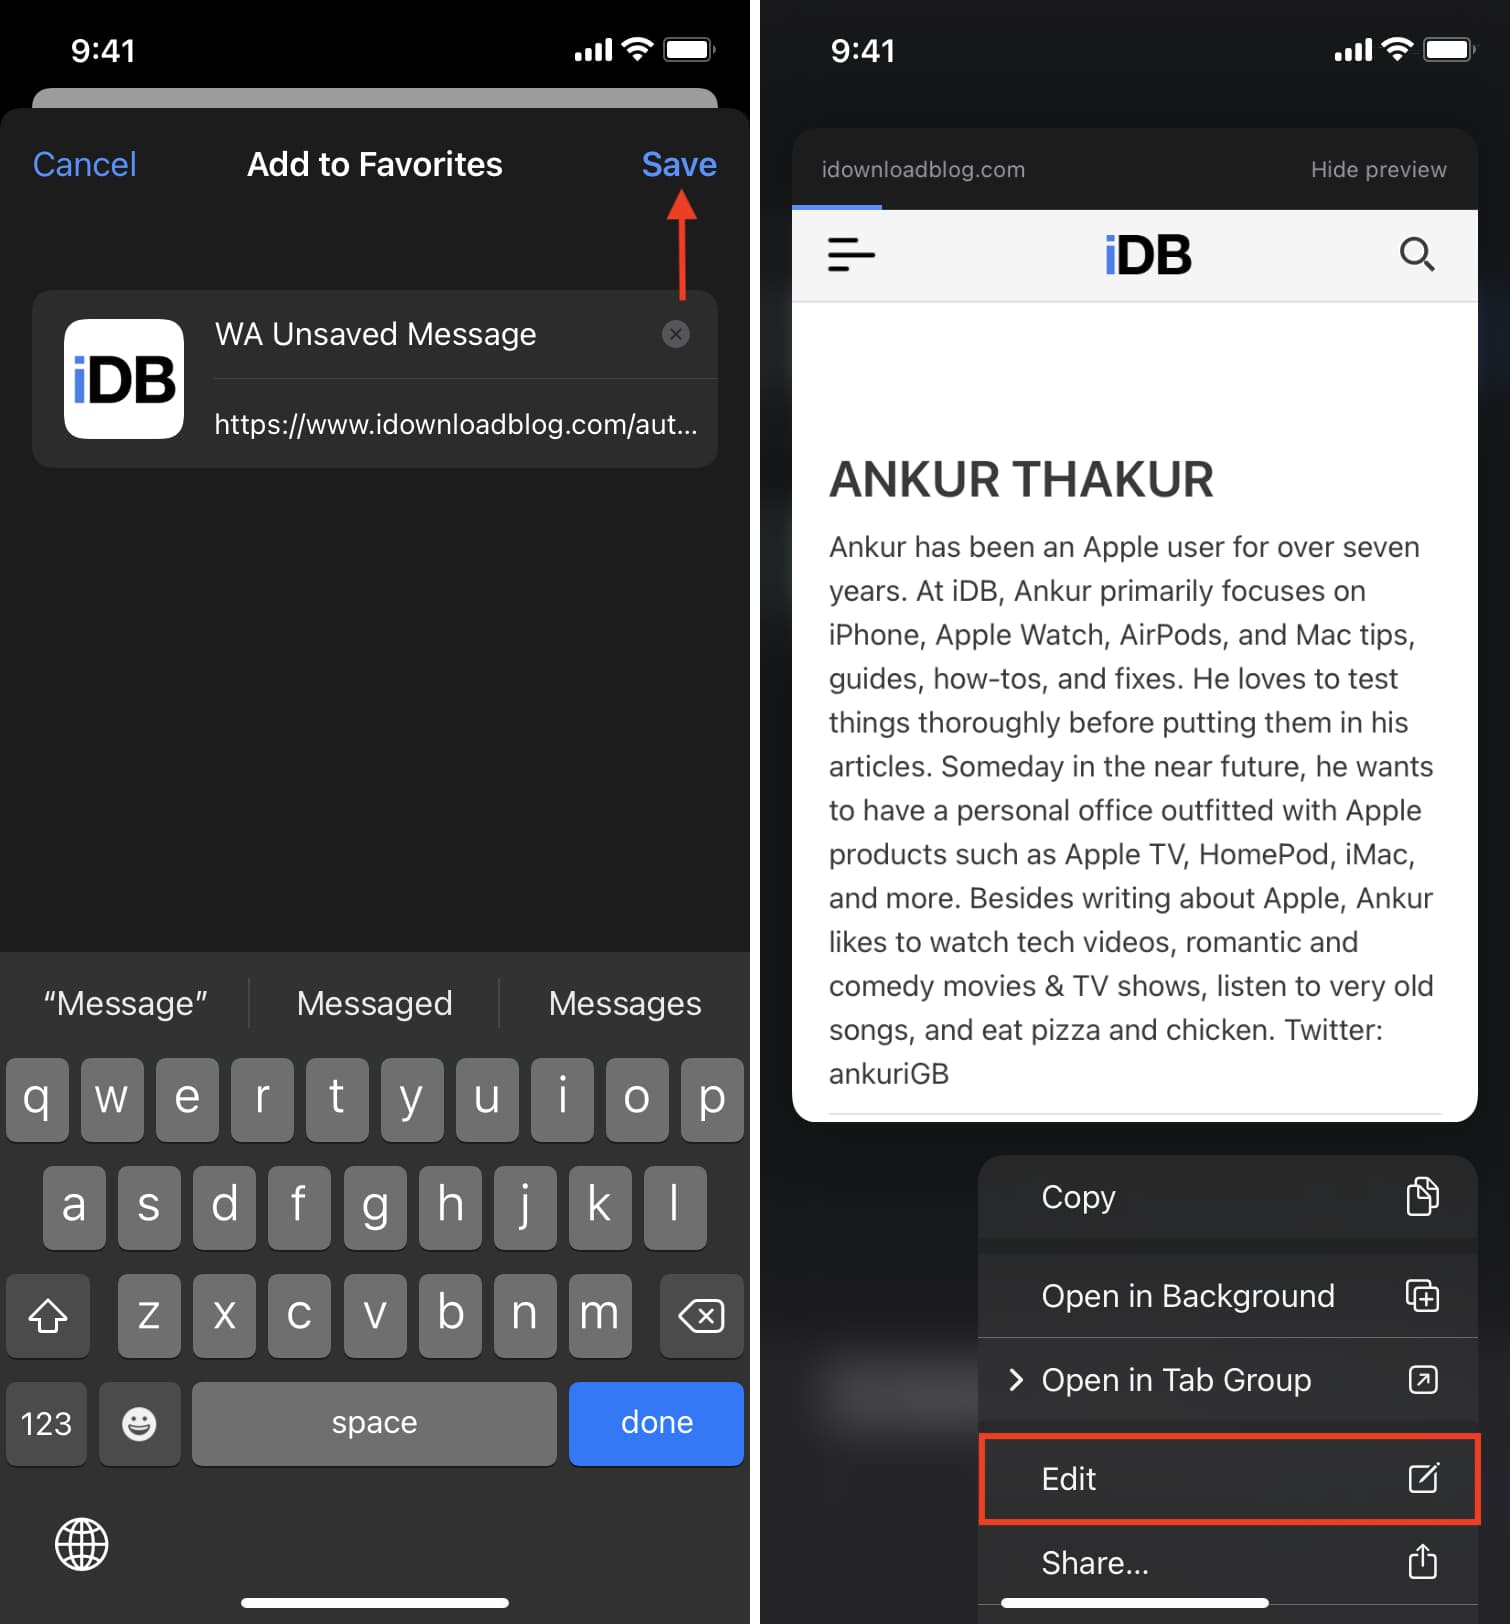 Add to Favorites in Safari on iPhone and edit it